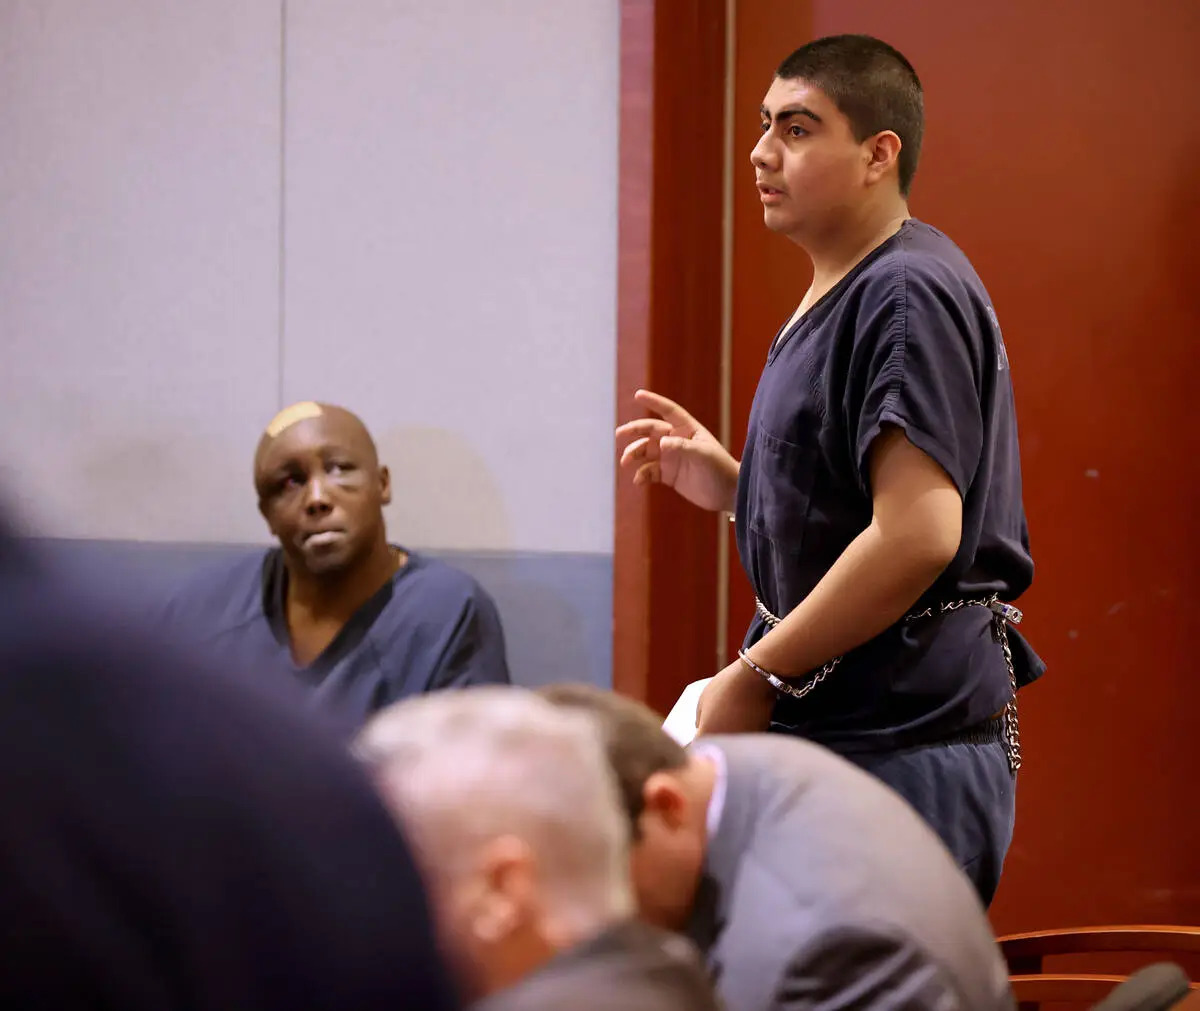 Nevada teenager Martinez Garcia pleaded guilty to attempted murder, attempted sexual assault, and battery with a deadly weapon. (Photo: Las Vegas Journal)